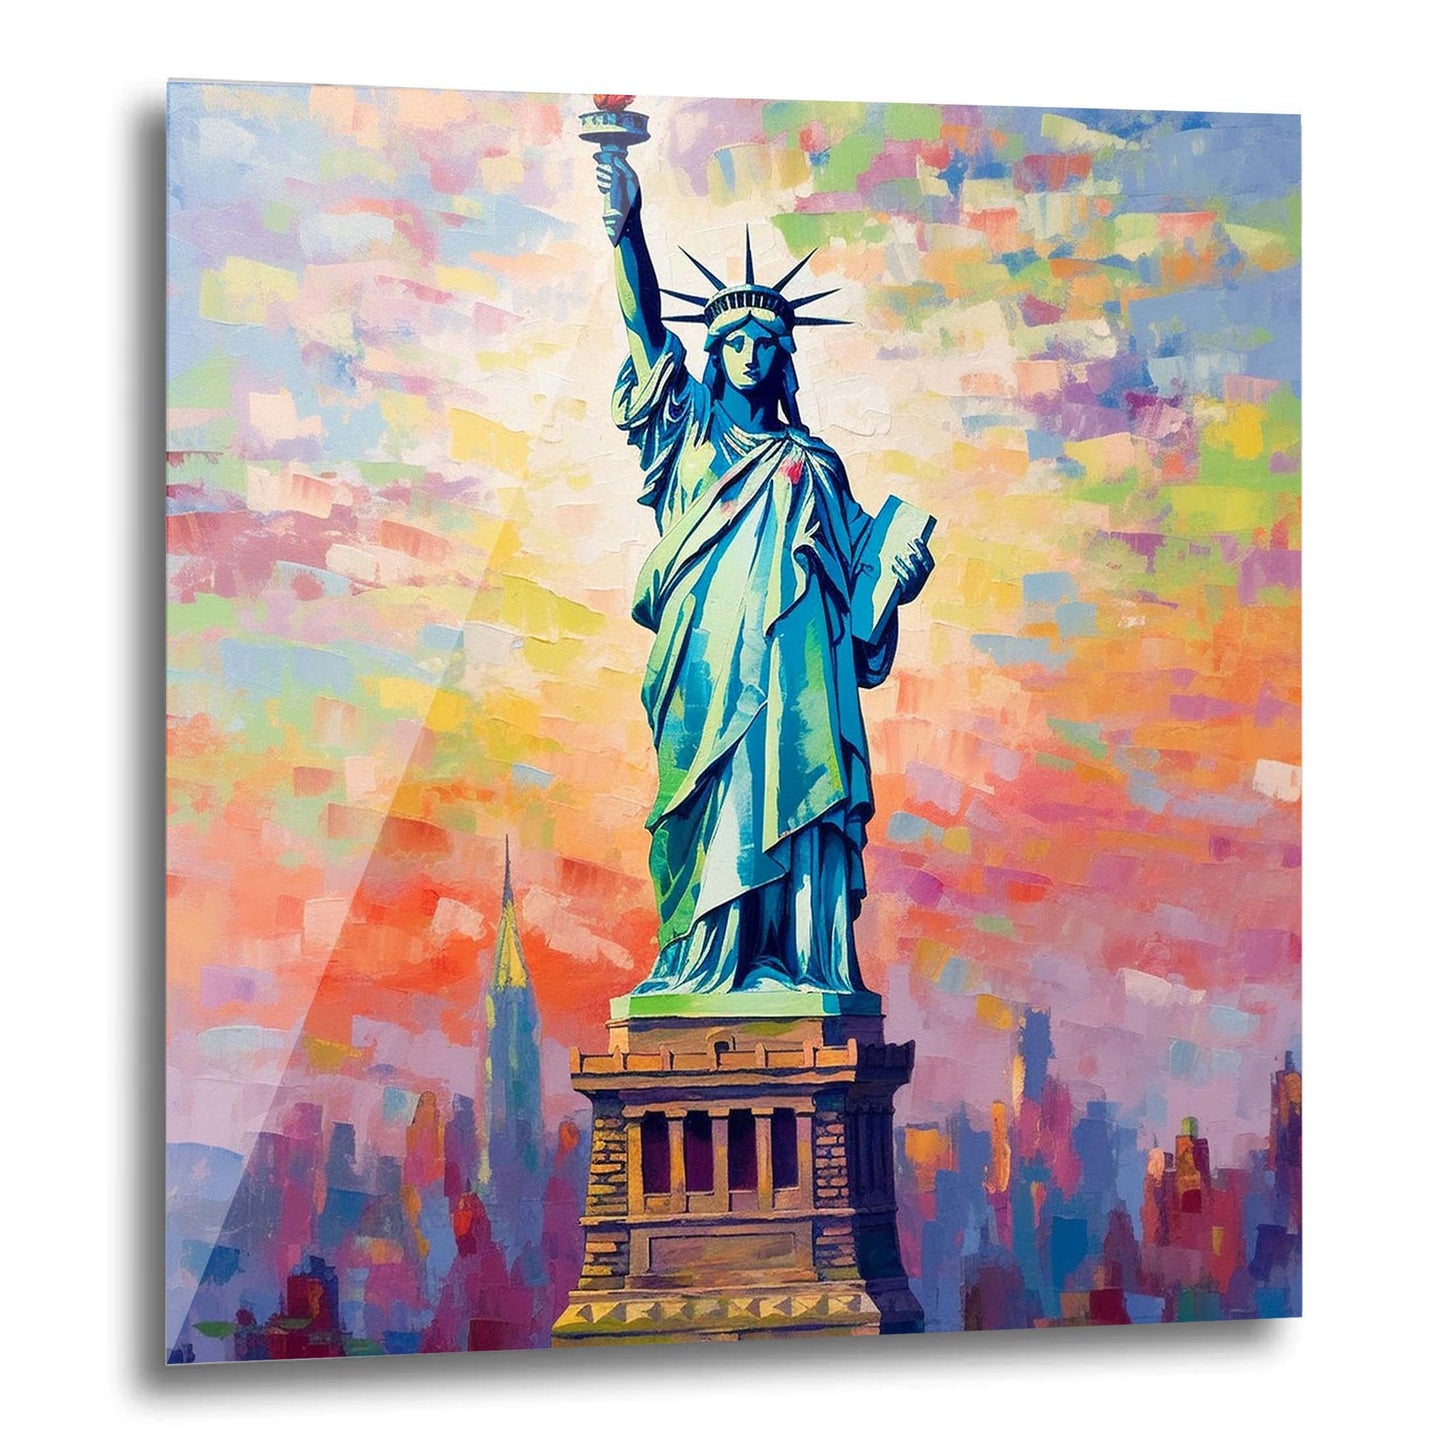 New York Statue of Liberty - mural in the style of impressionism